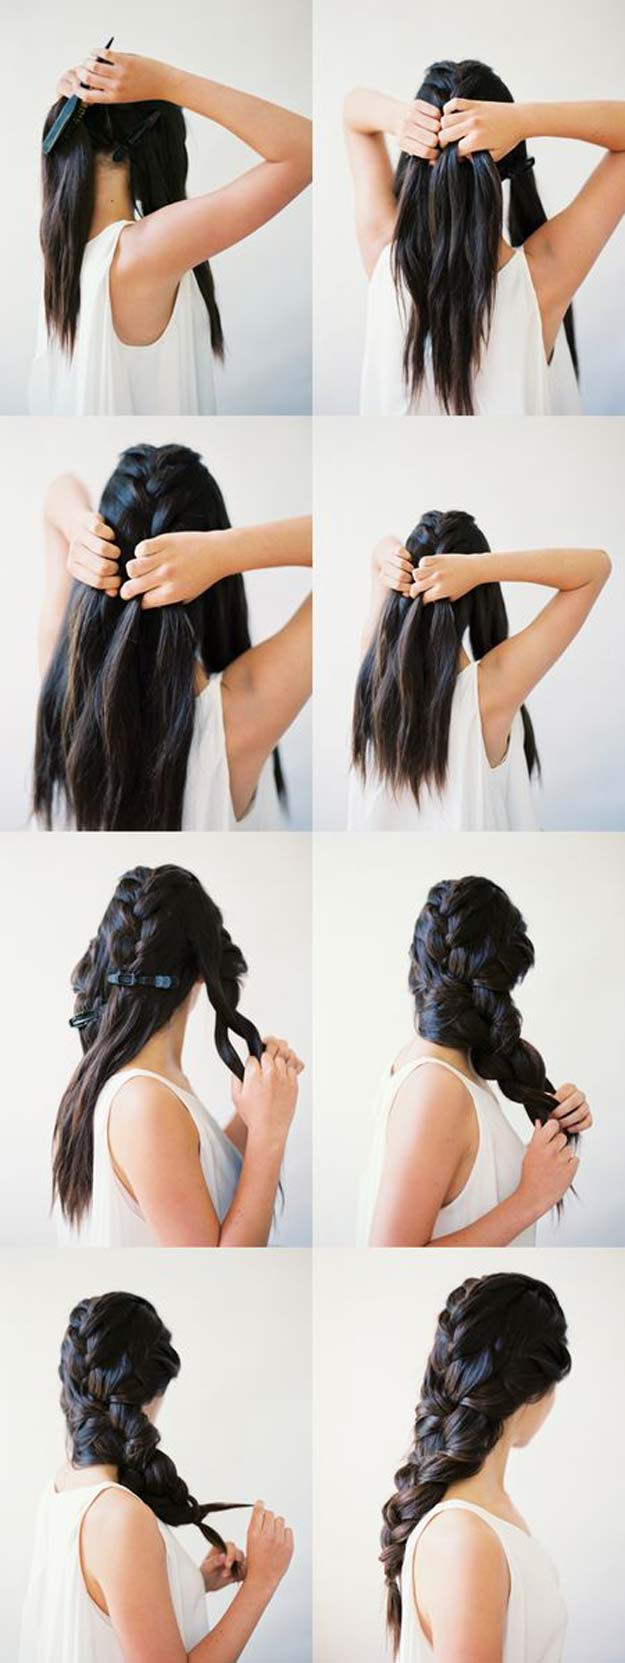 Easy Hairstyles For Medium Hair Step By Step
 41 DIY Cool Easy Hairstyles That Real People Can Actually